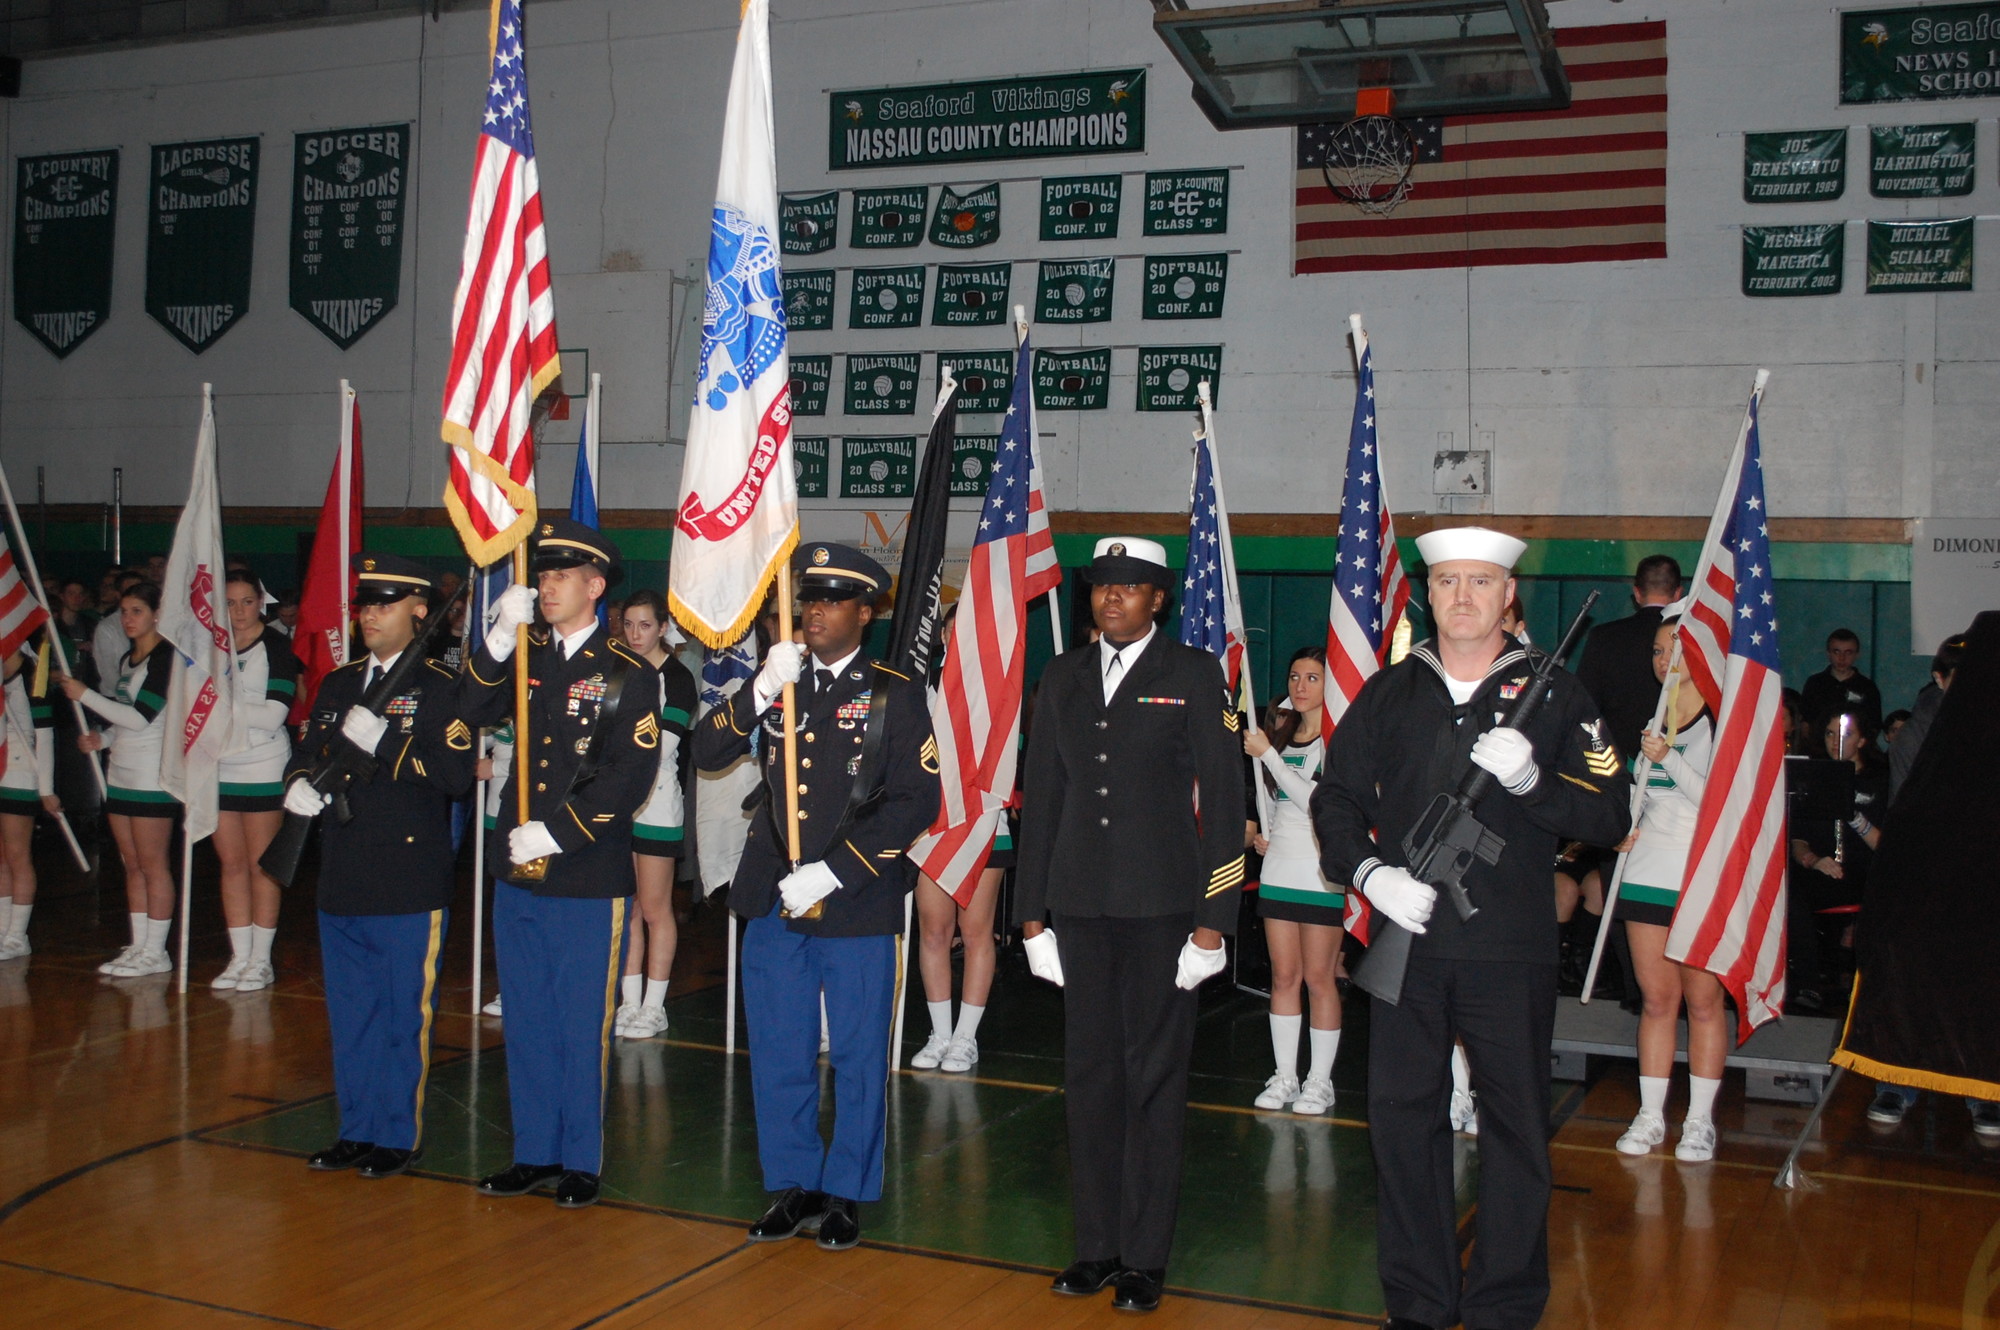 The ceremony included a military honor guard and a flag presentation by Seaford cheerleaders.